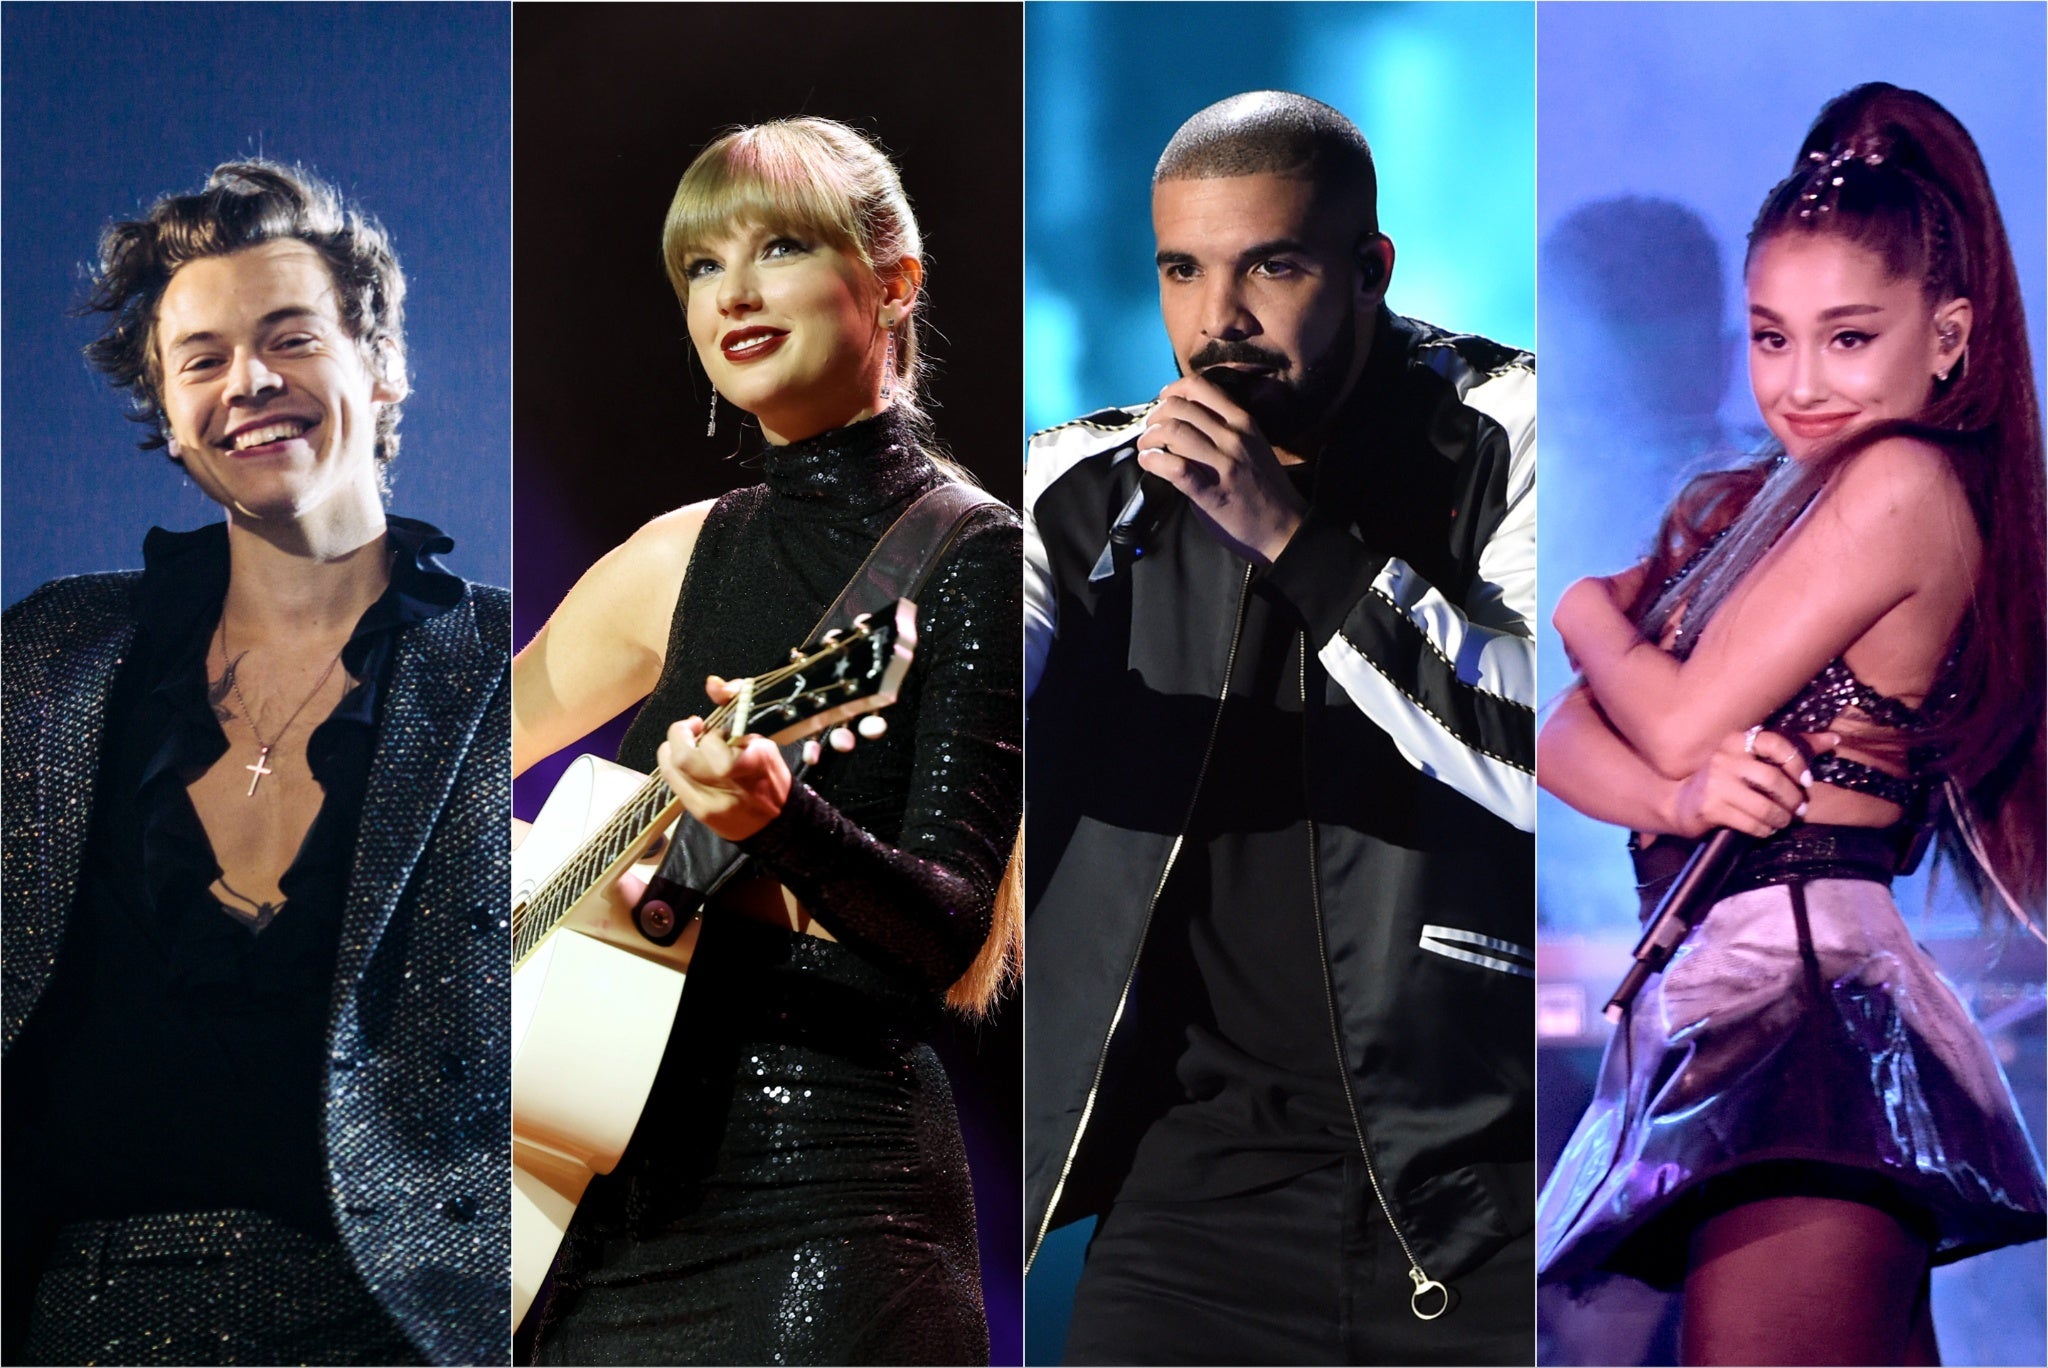 L-R: Songs by Harry Styles, Taylor Swift, Drake and Ariana Grande could all be wiped from TikTok